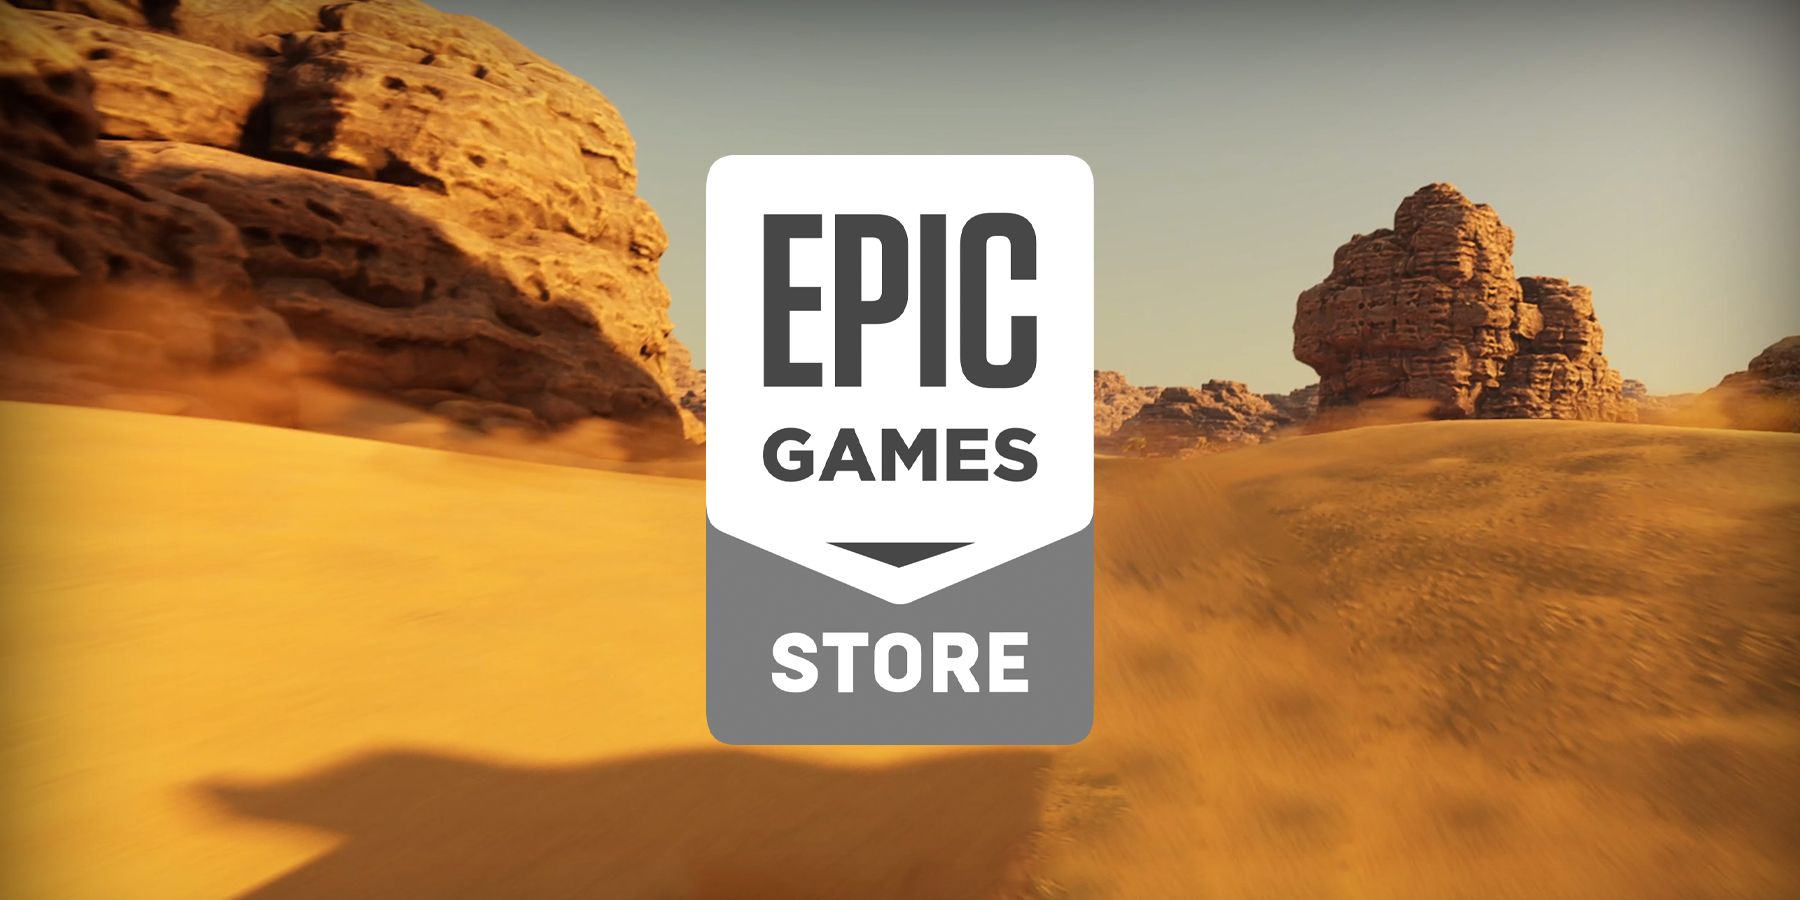 Every Free Game Released On The Epic Games Store